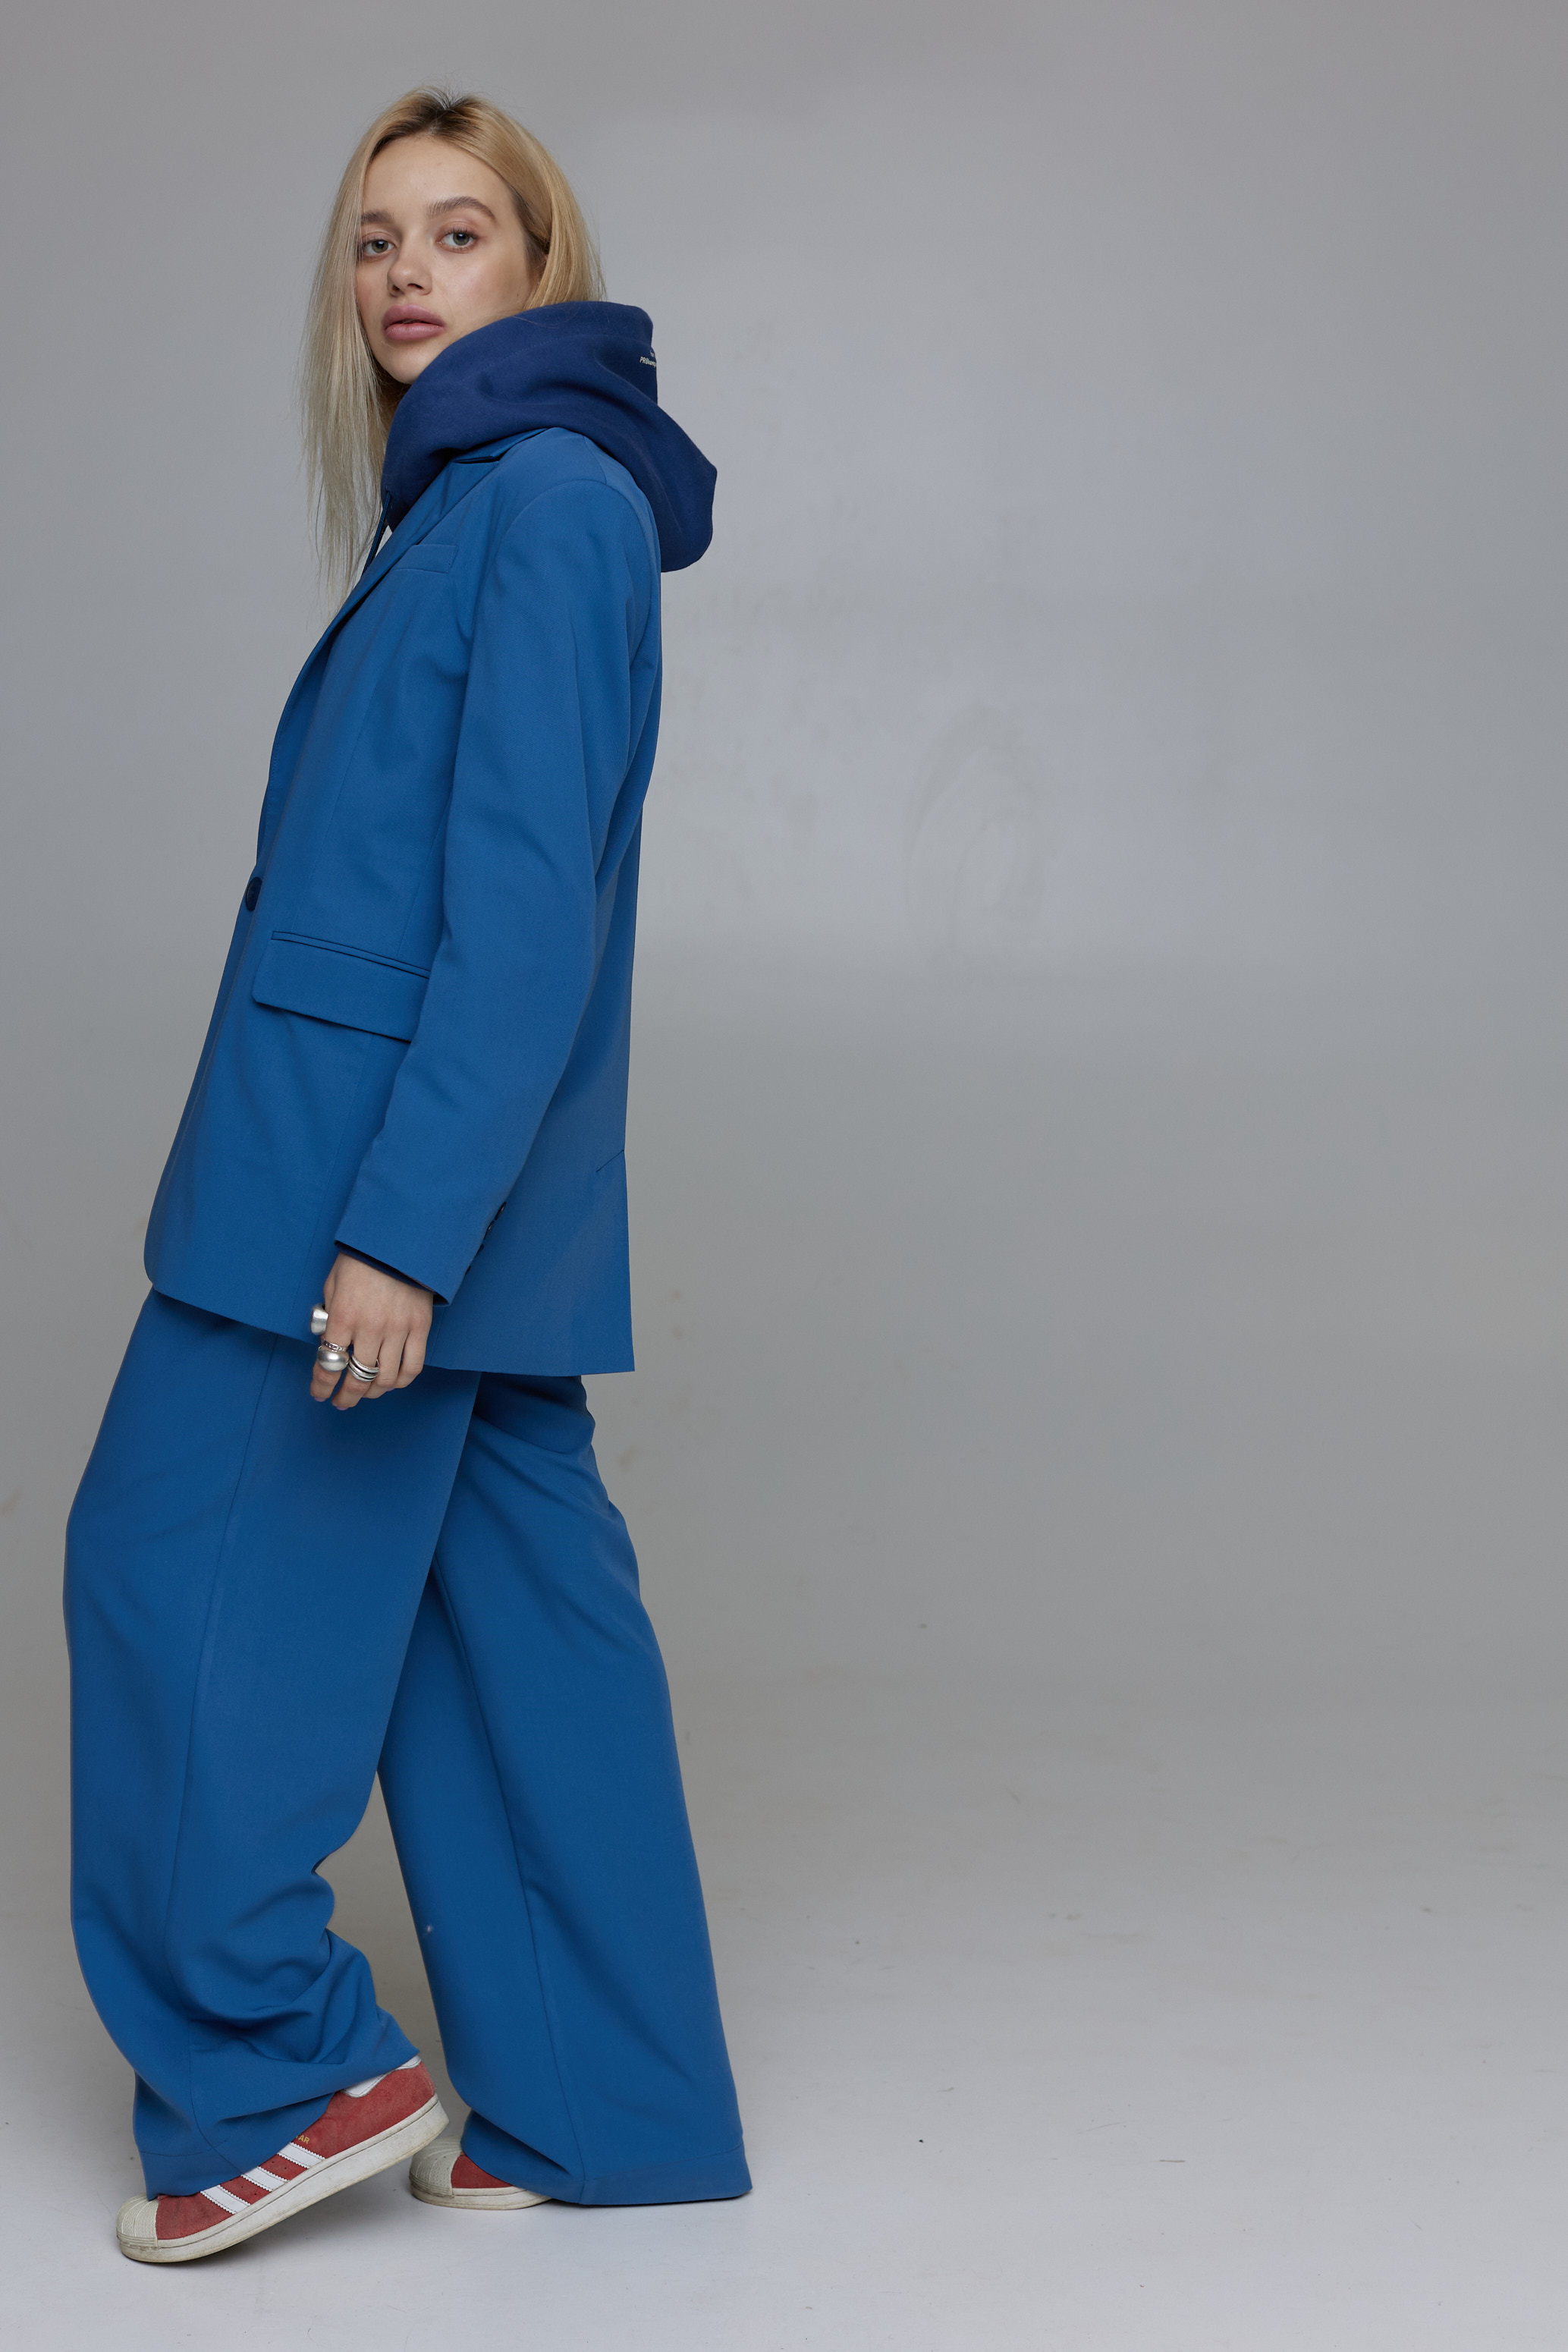 day`n`night suit in blue color